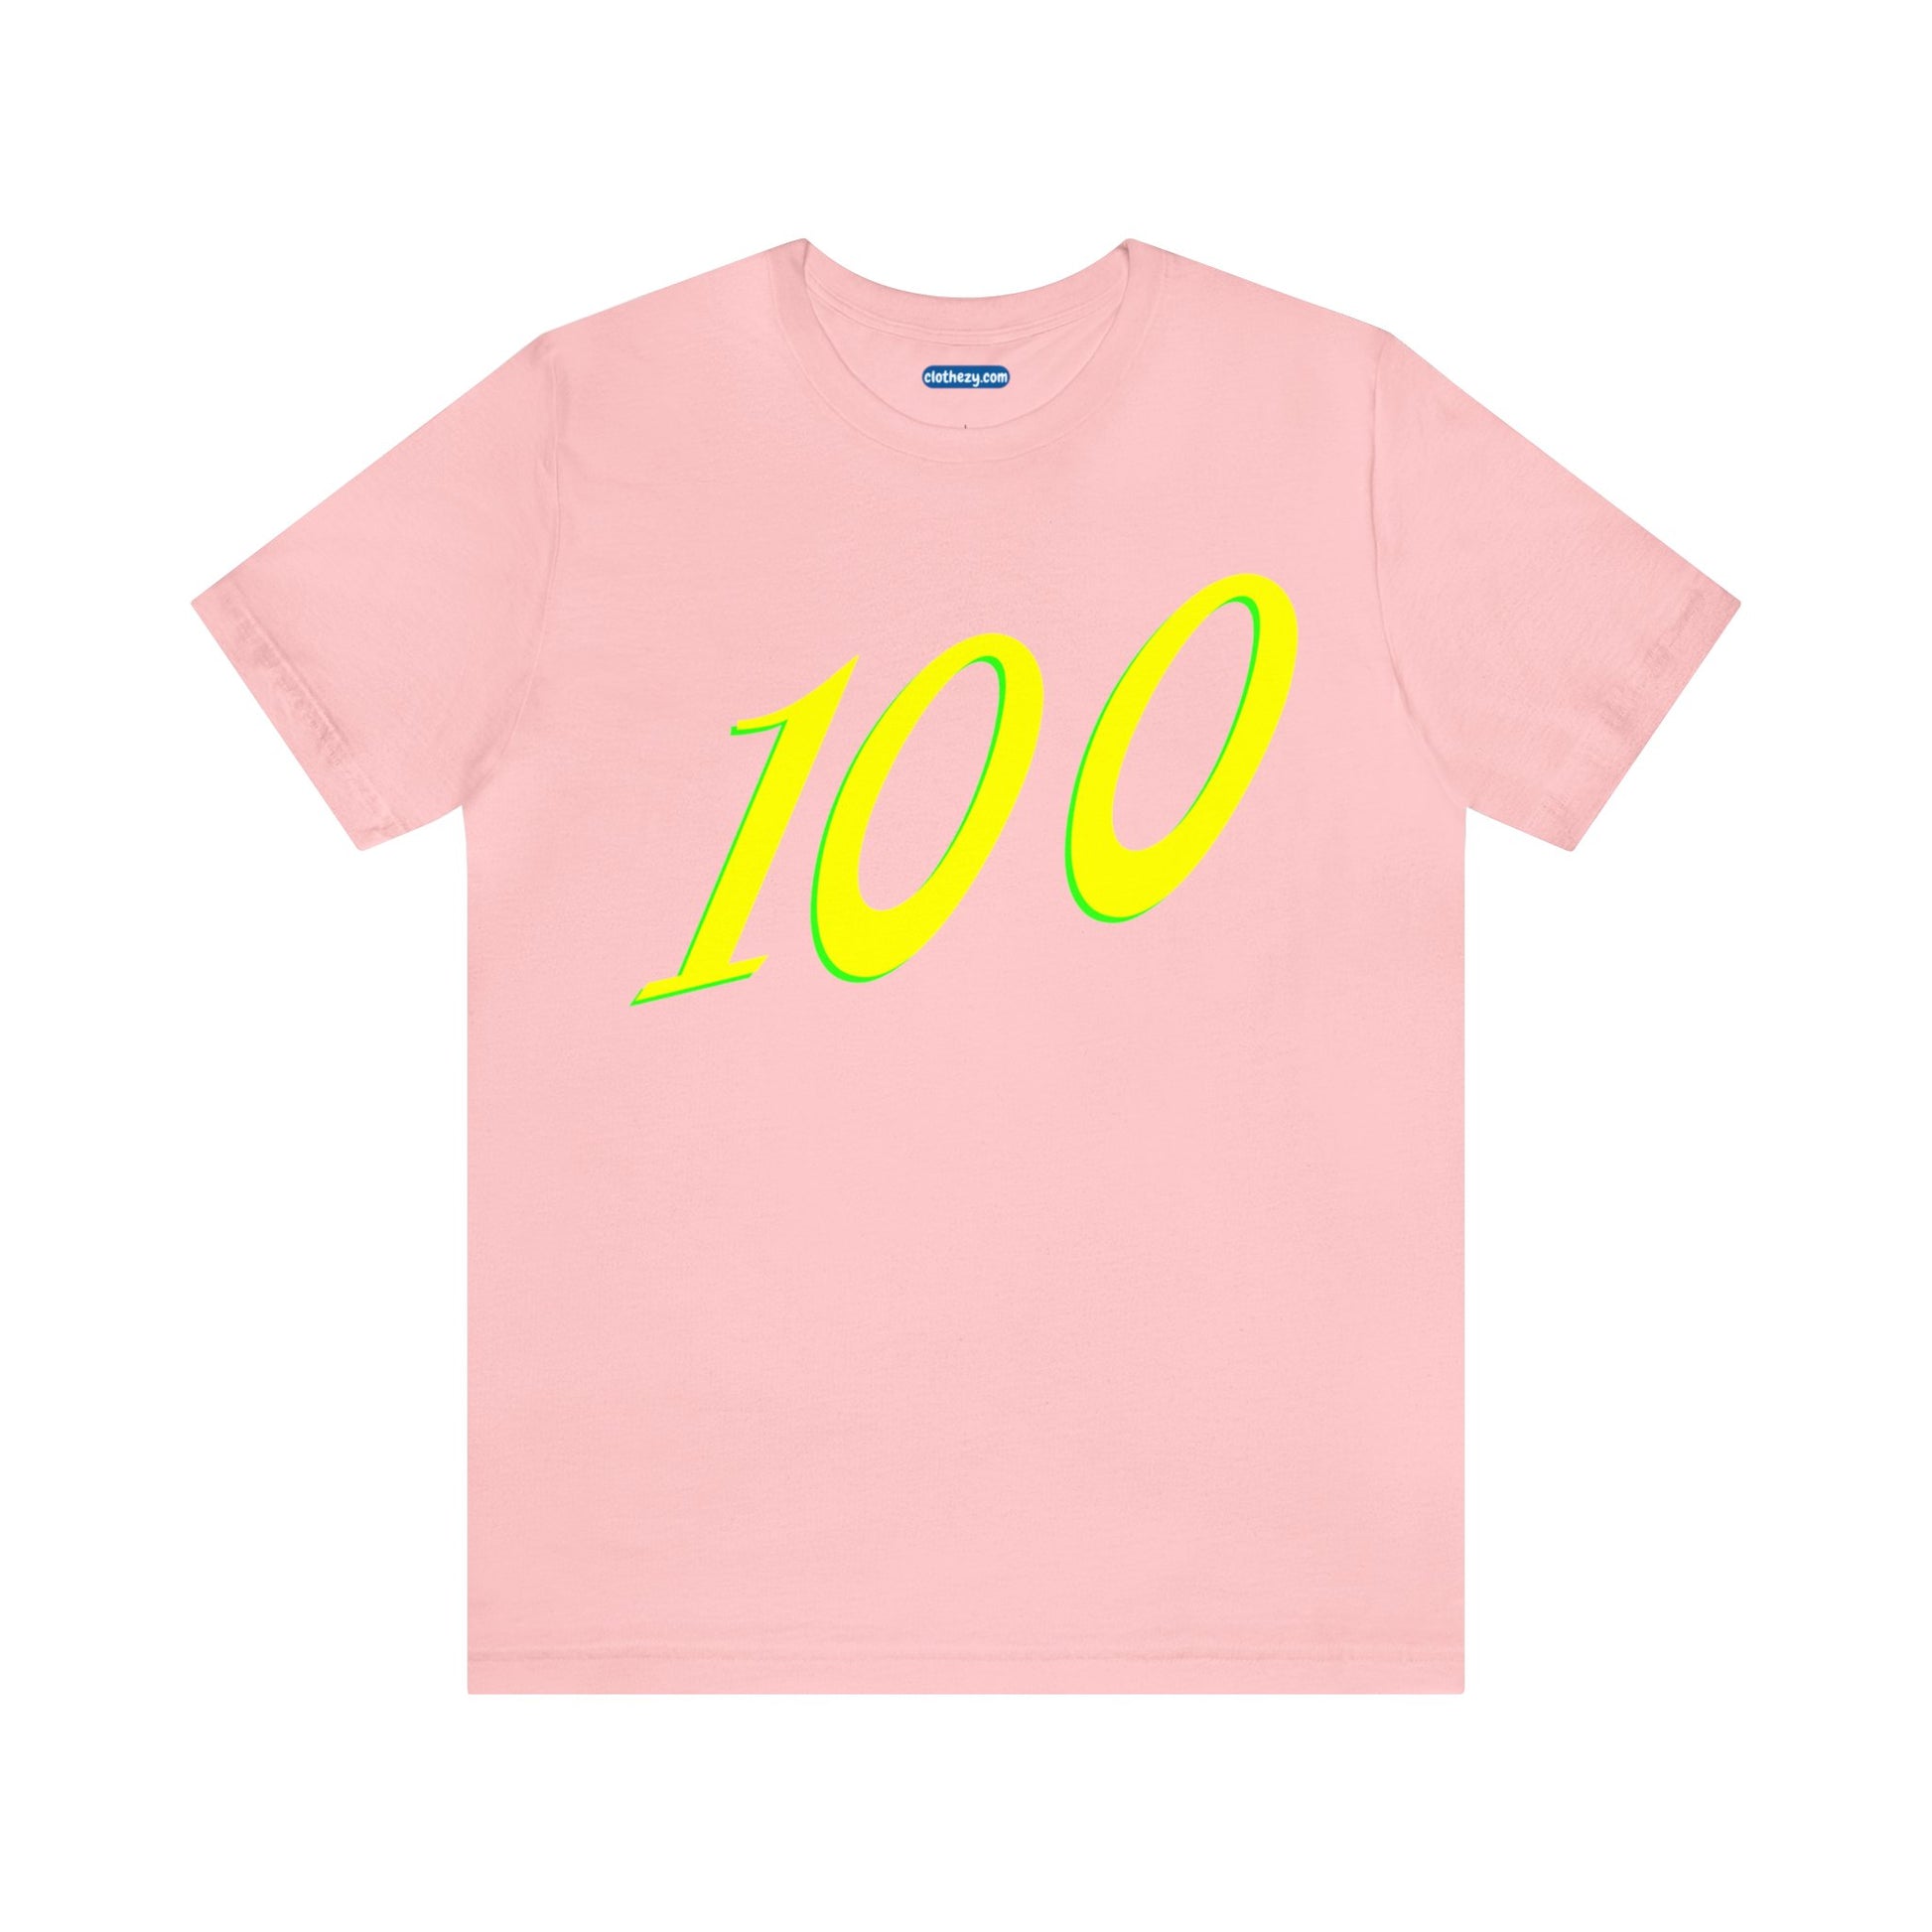 Number 100 Design - Soft Cotton Tee for birthdays and celebrations, Gift for friends and family, Multiple Options by clothezy.com in Pink Size Small - Buy Now